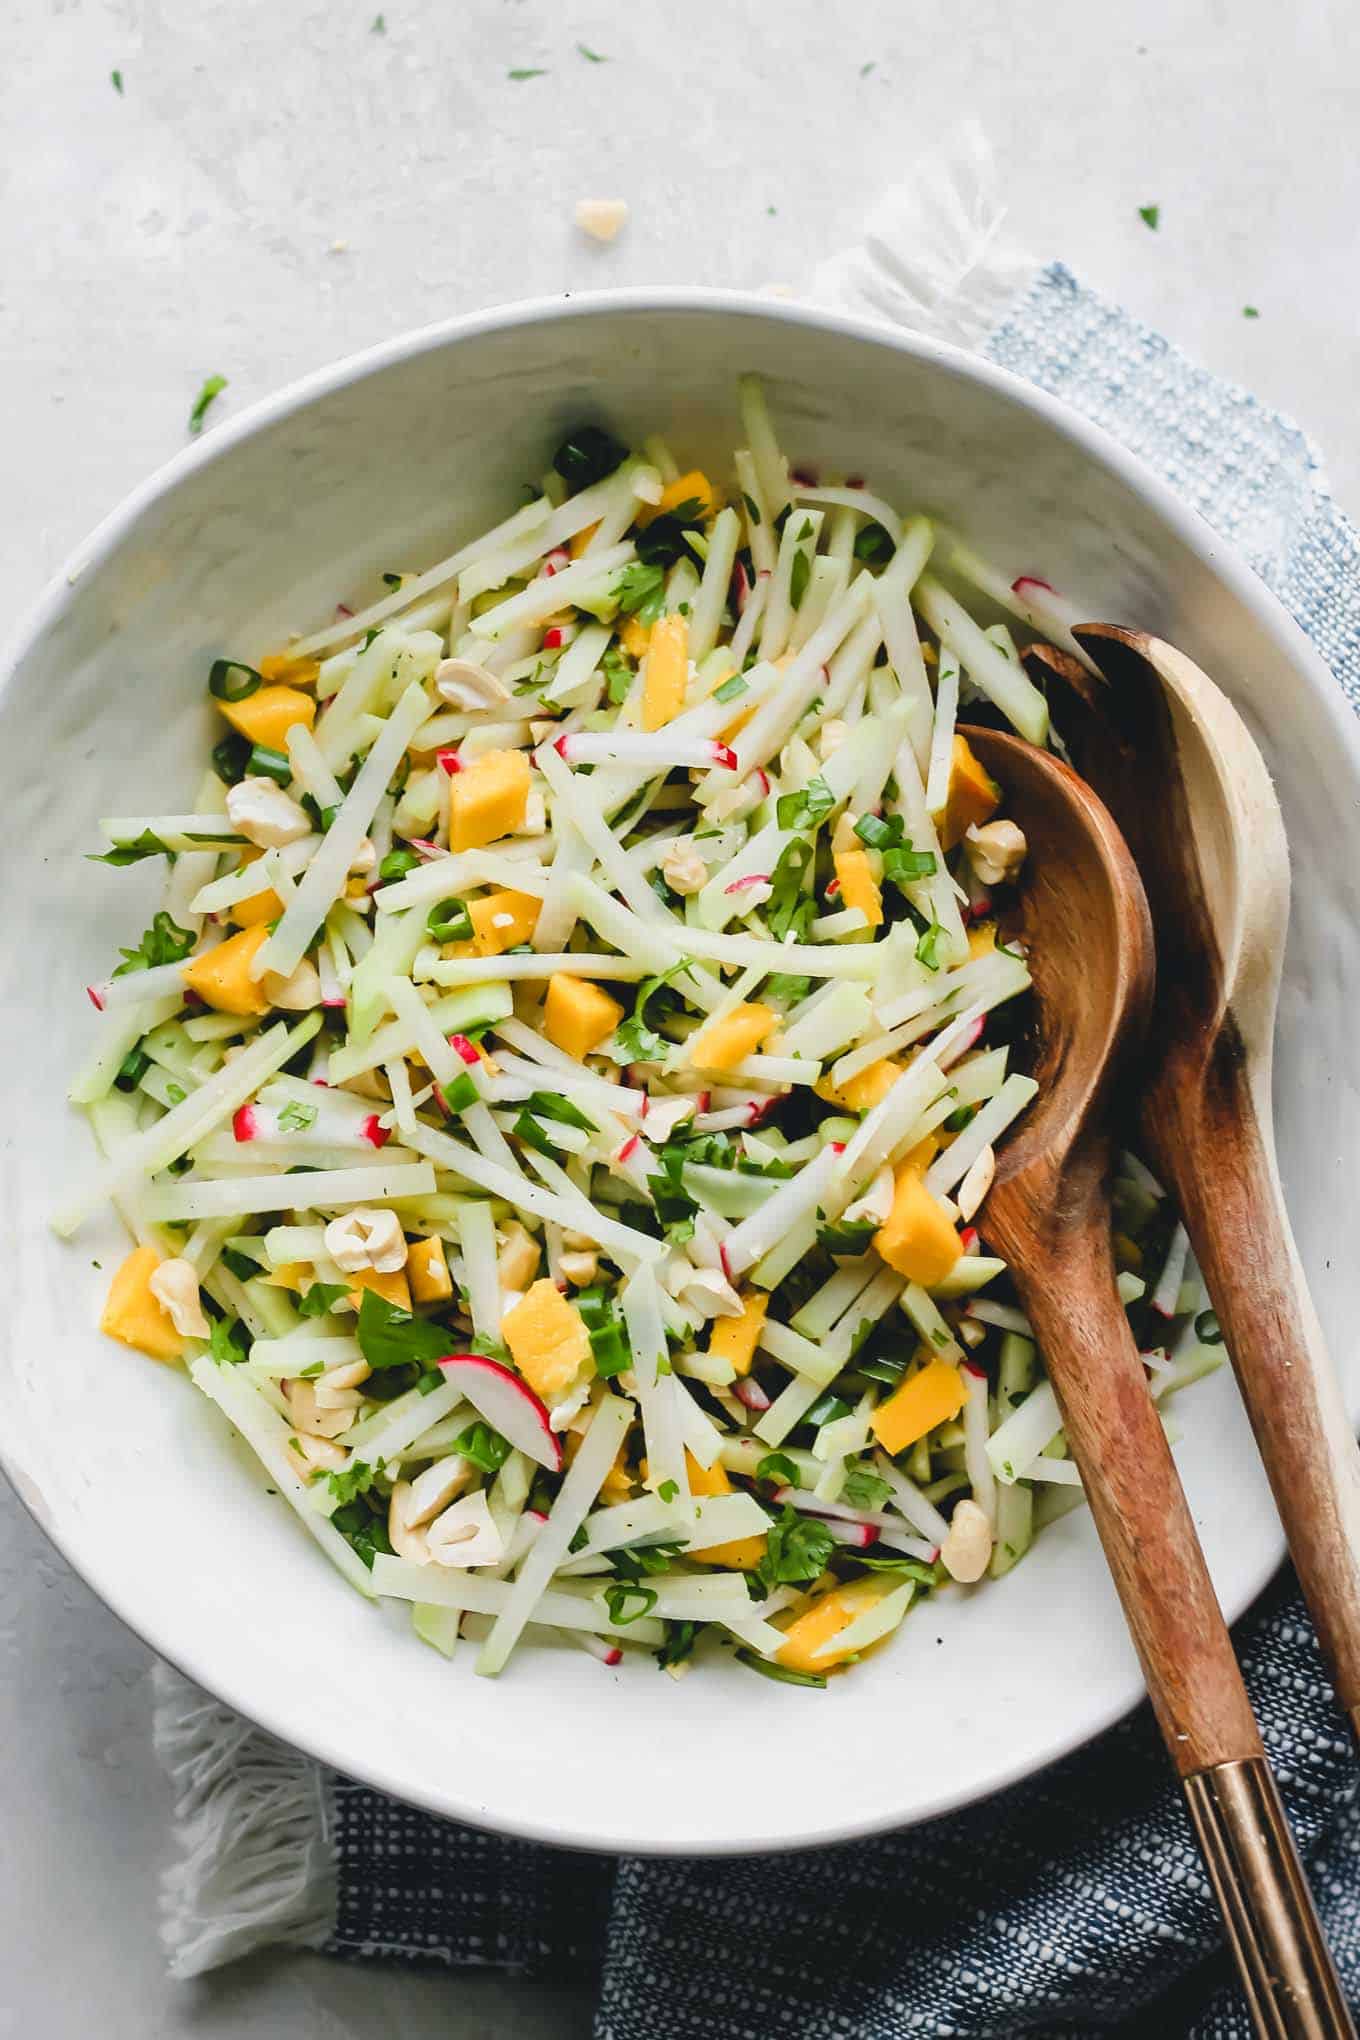 Tossed kohlrabi salad in a white bowl with salad servers.